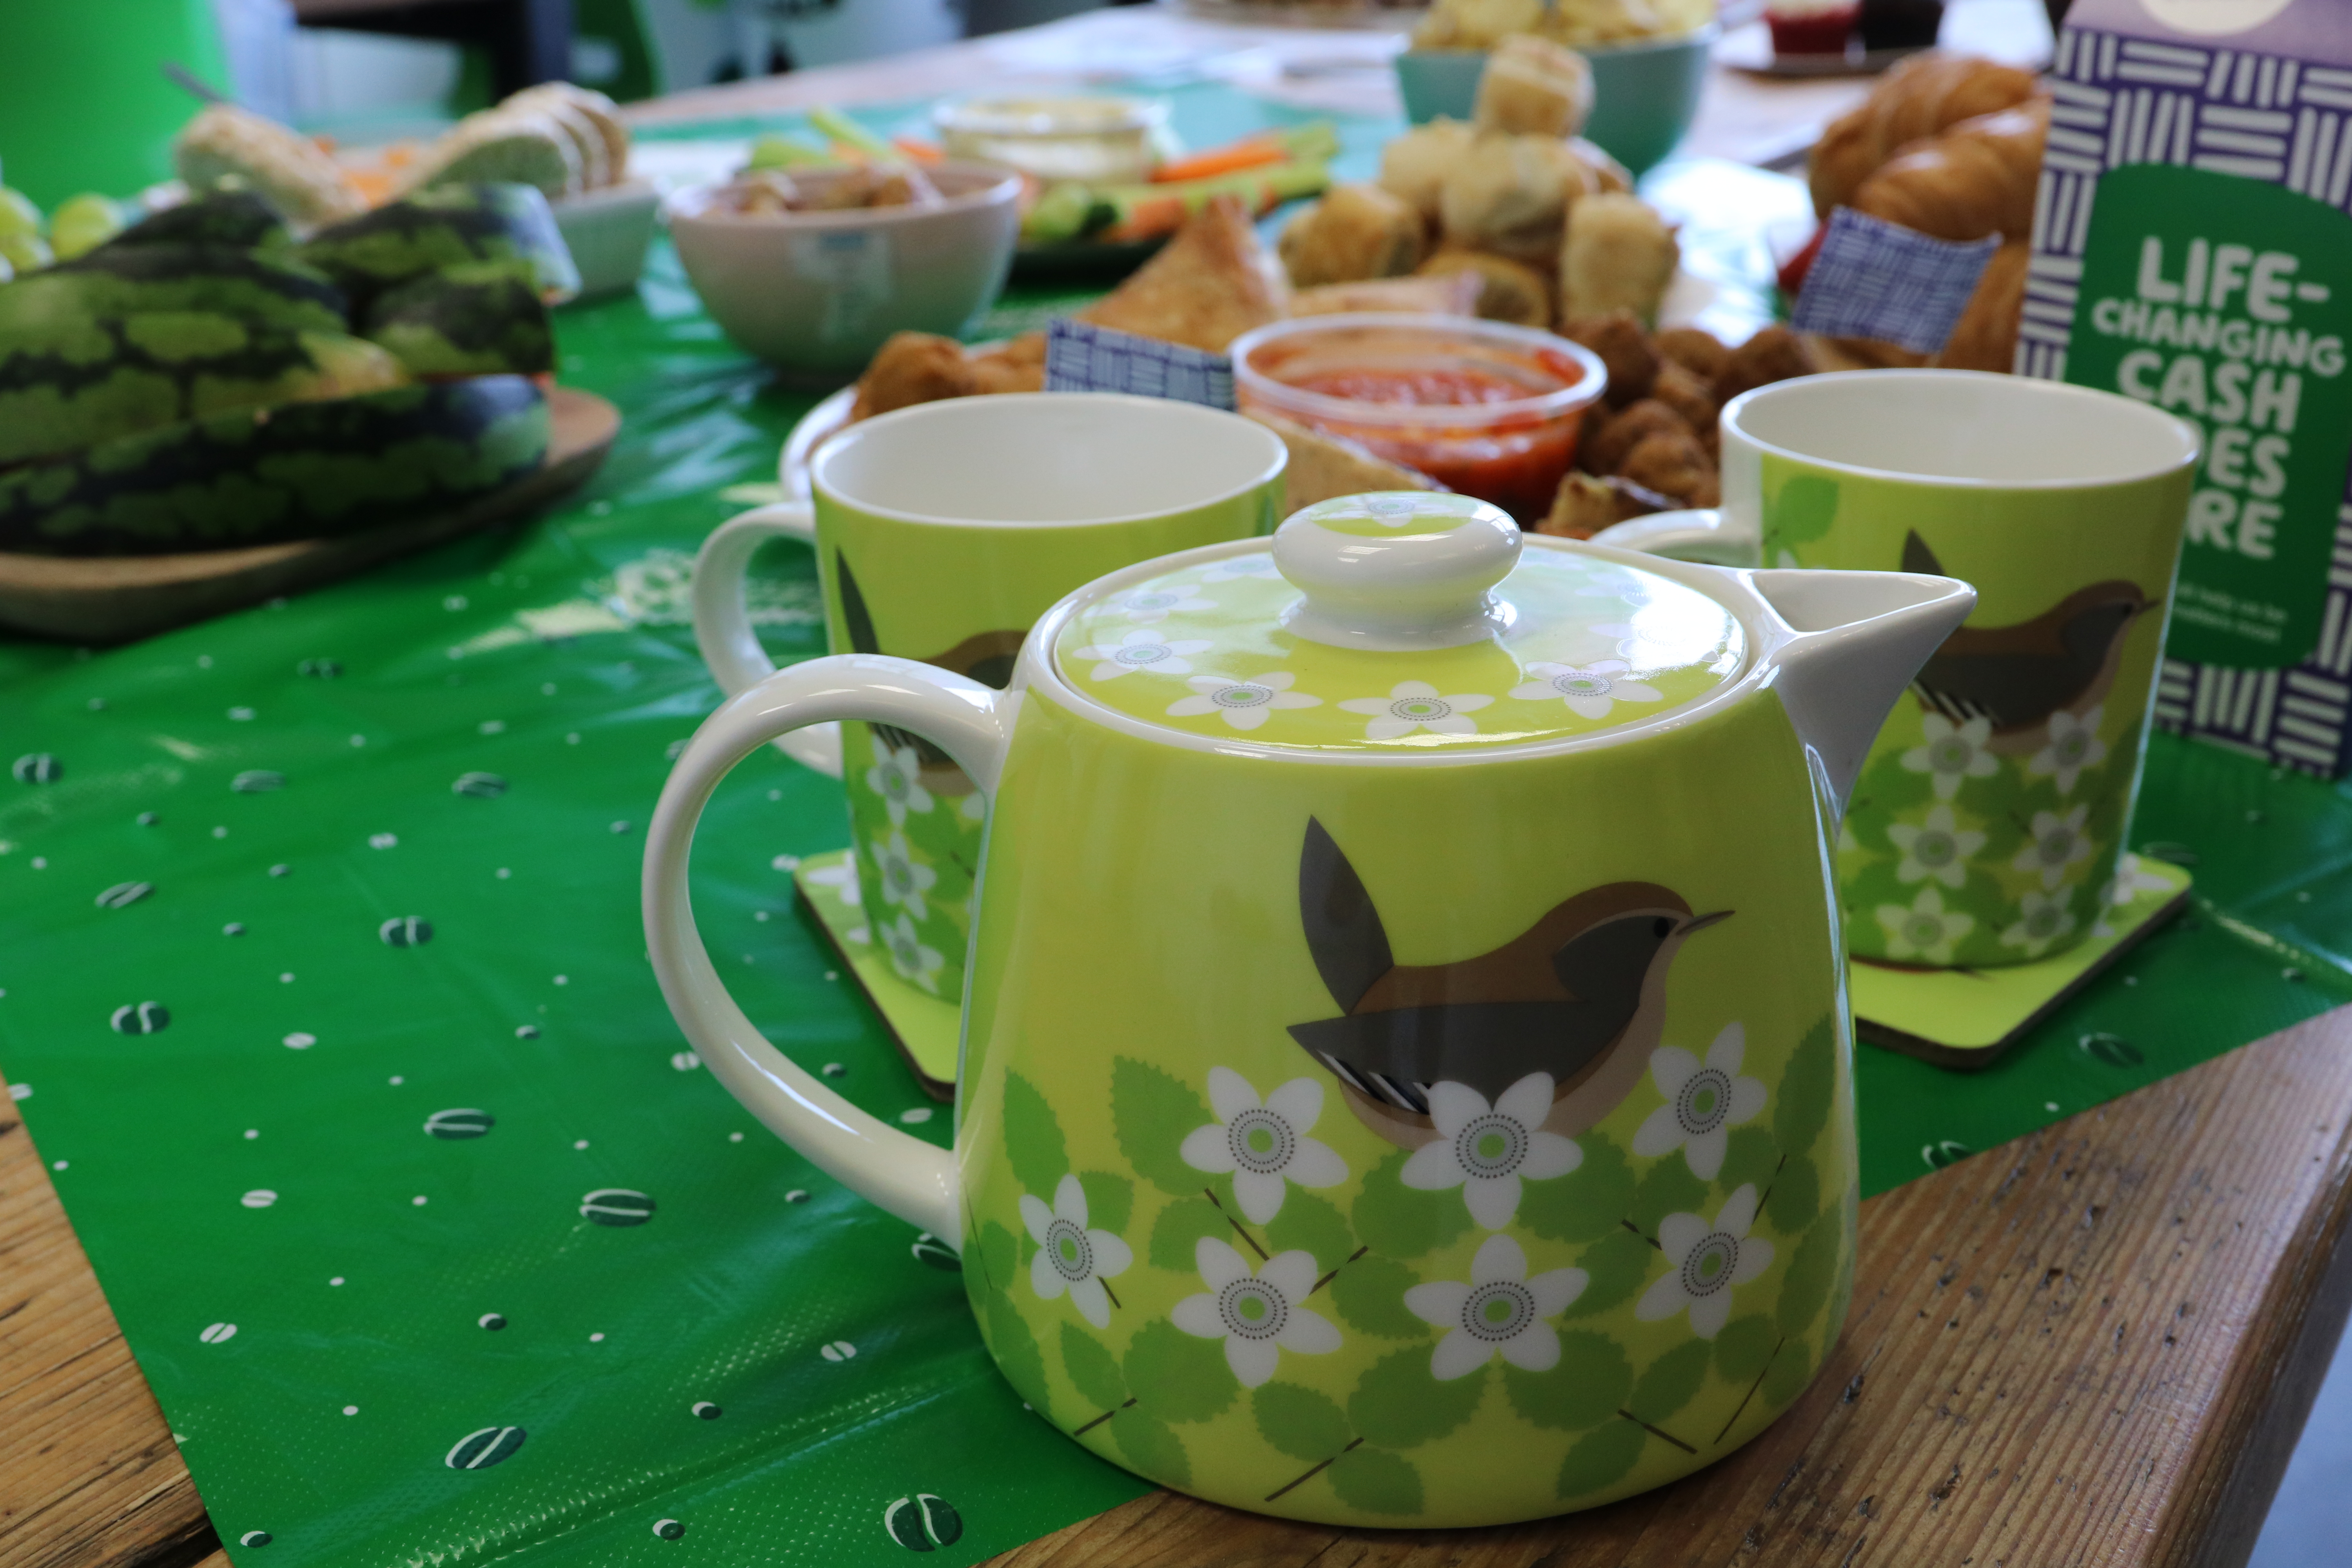 A green teapot on a table surrounded by cups and cakes.